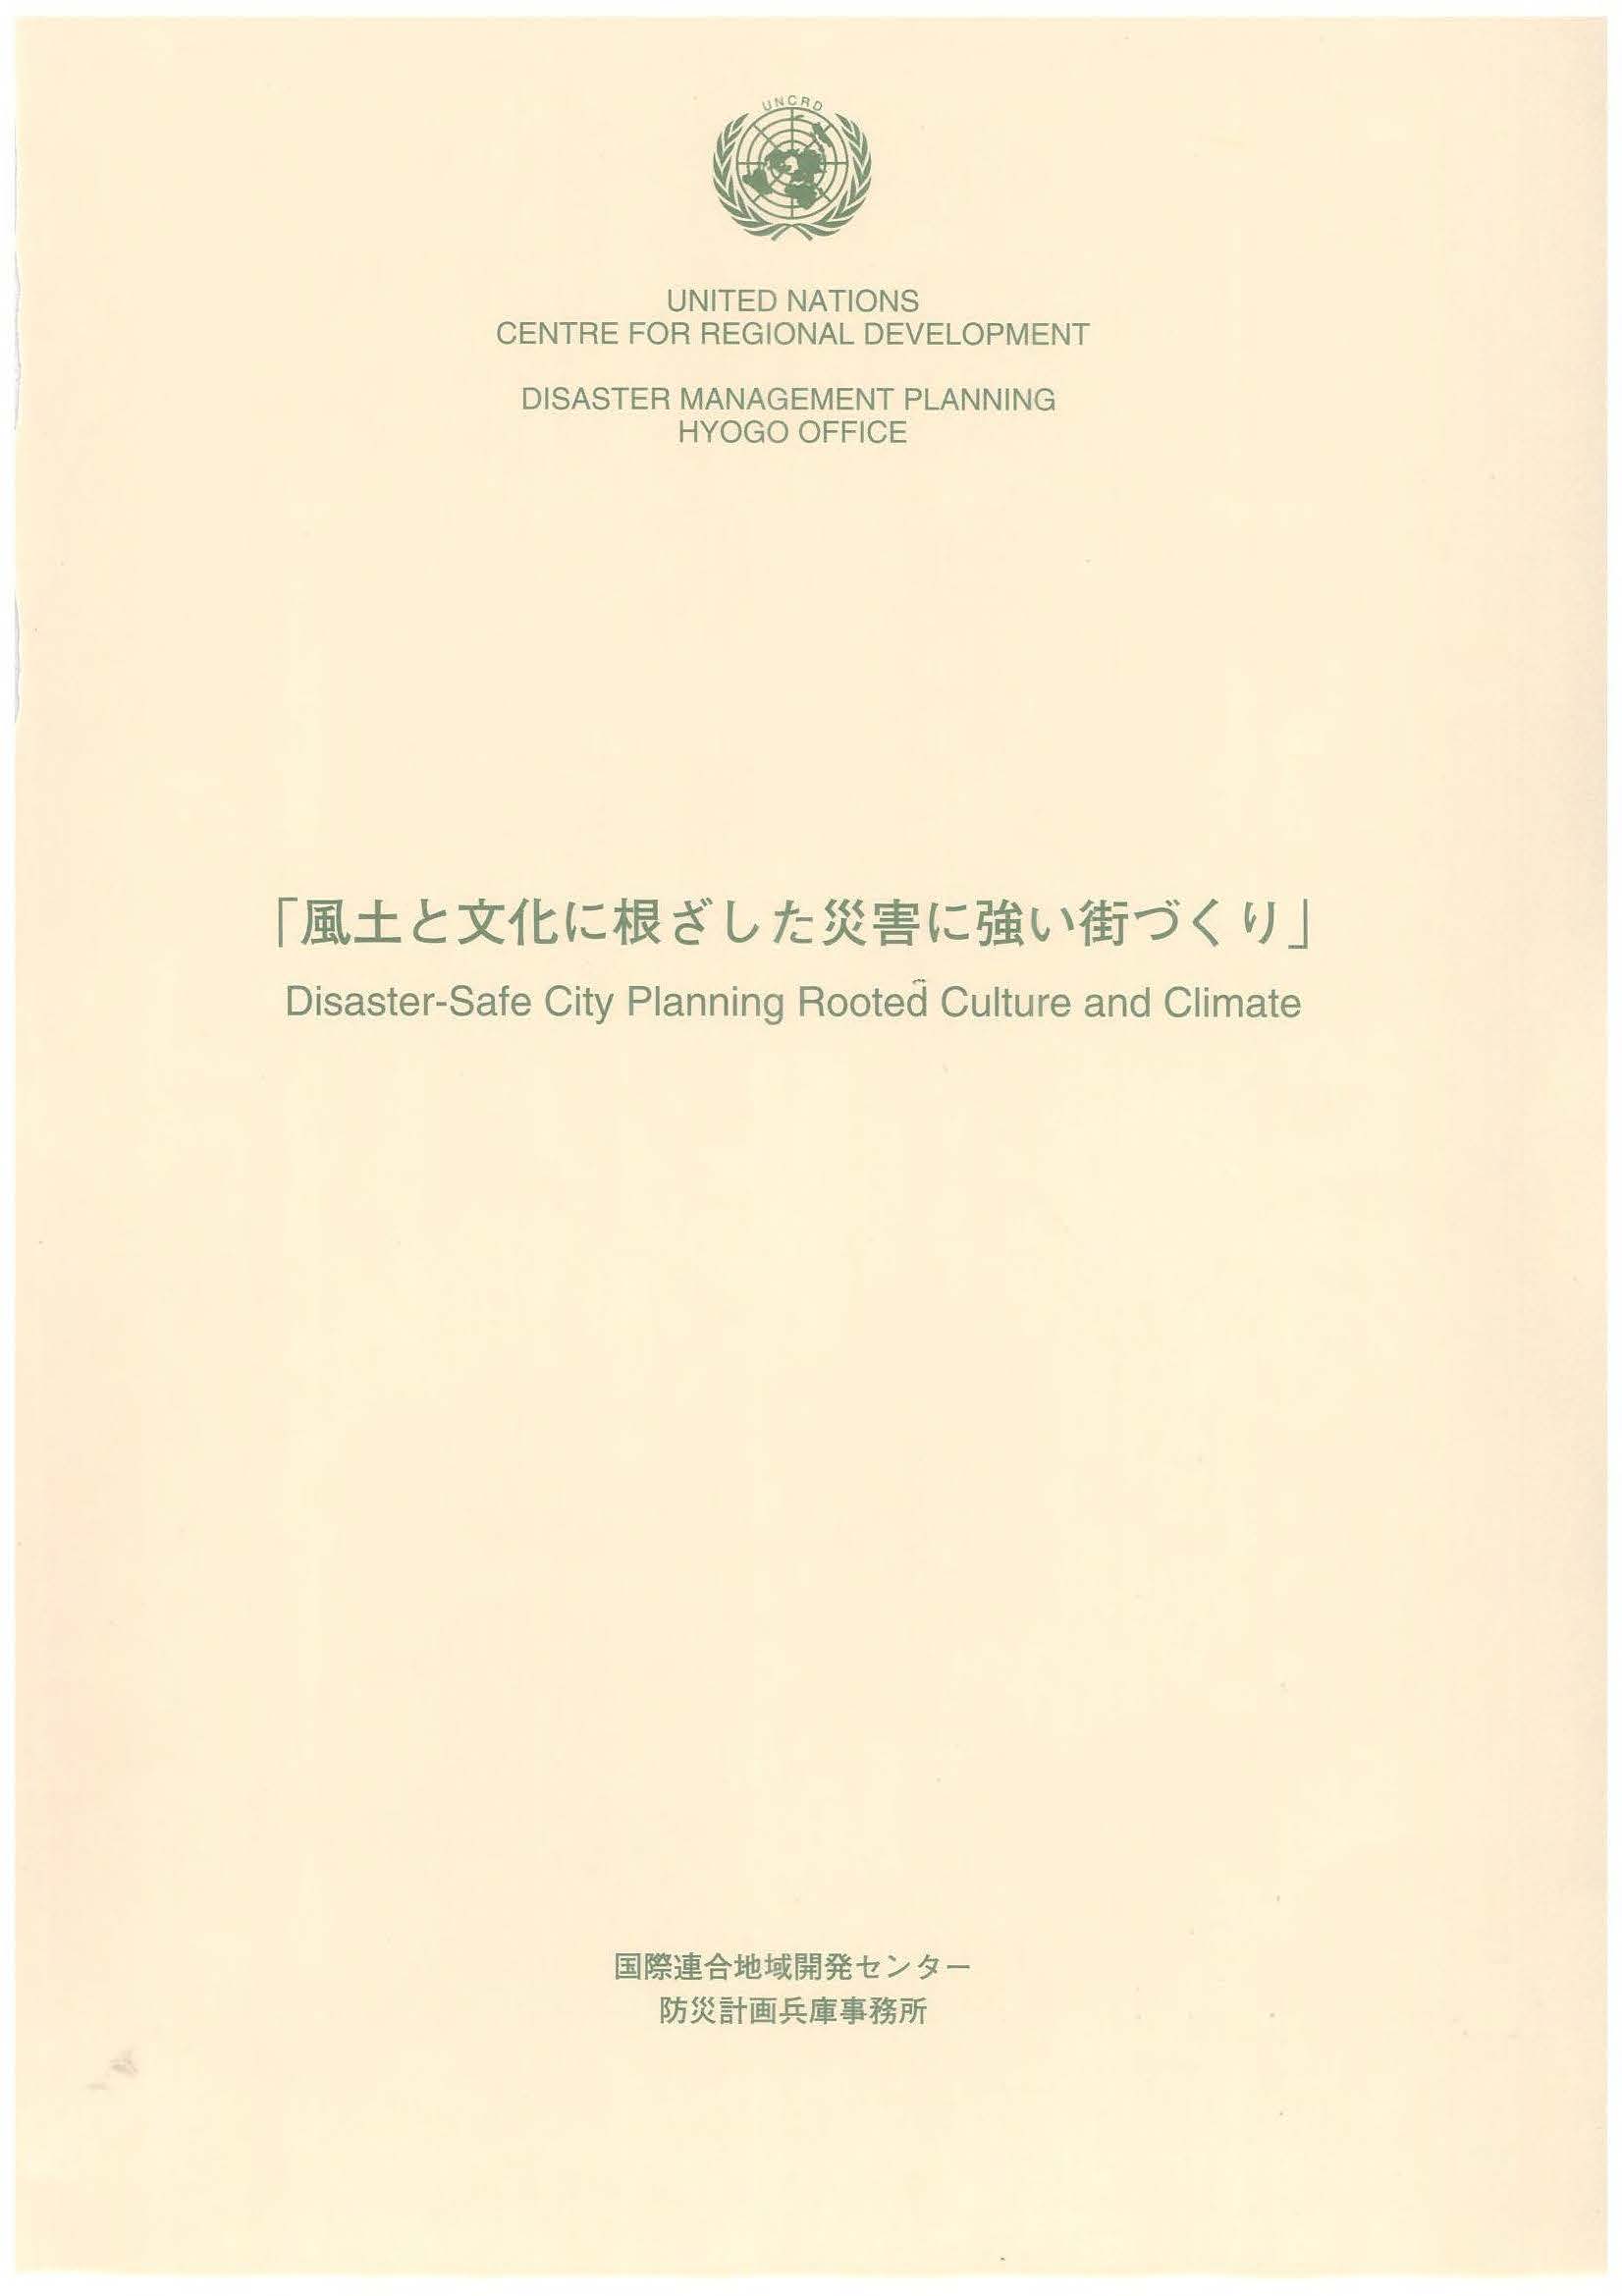 Cover of the report on Disaster-Safe City Planning Rooted Culture and Climate